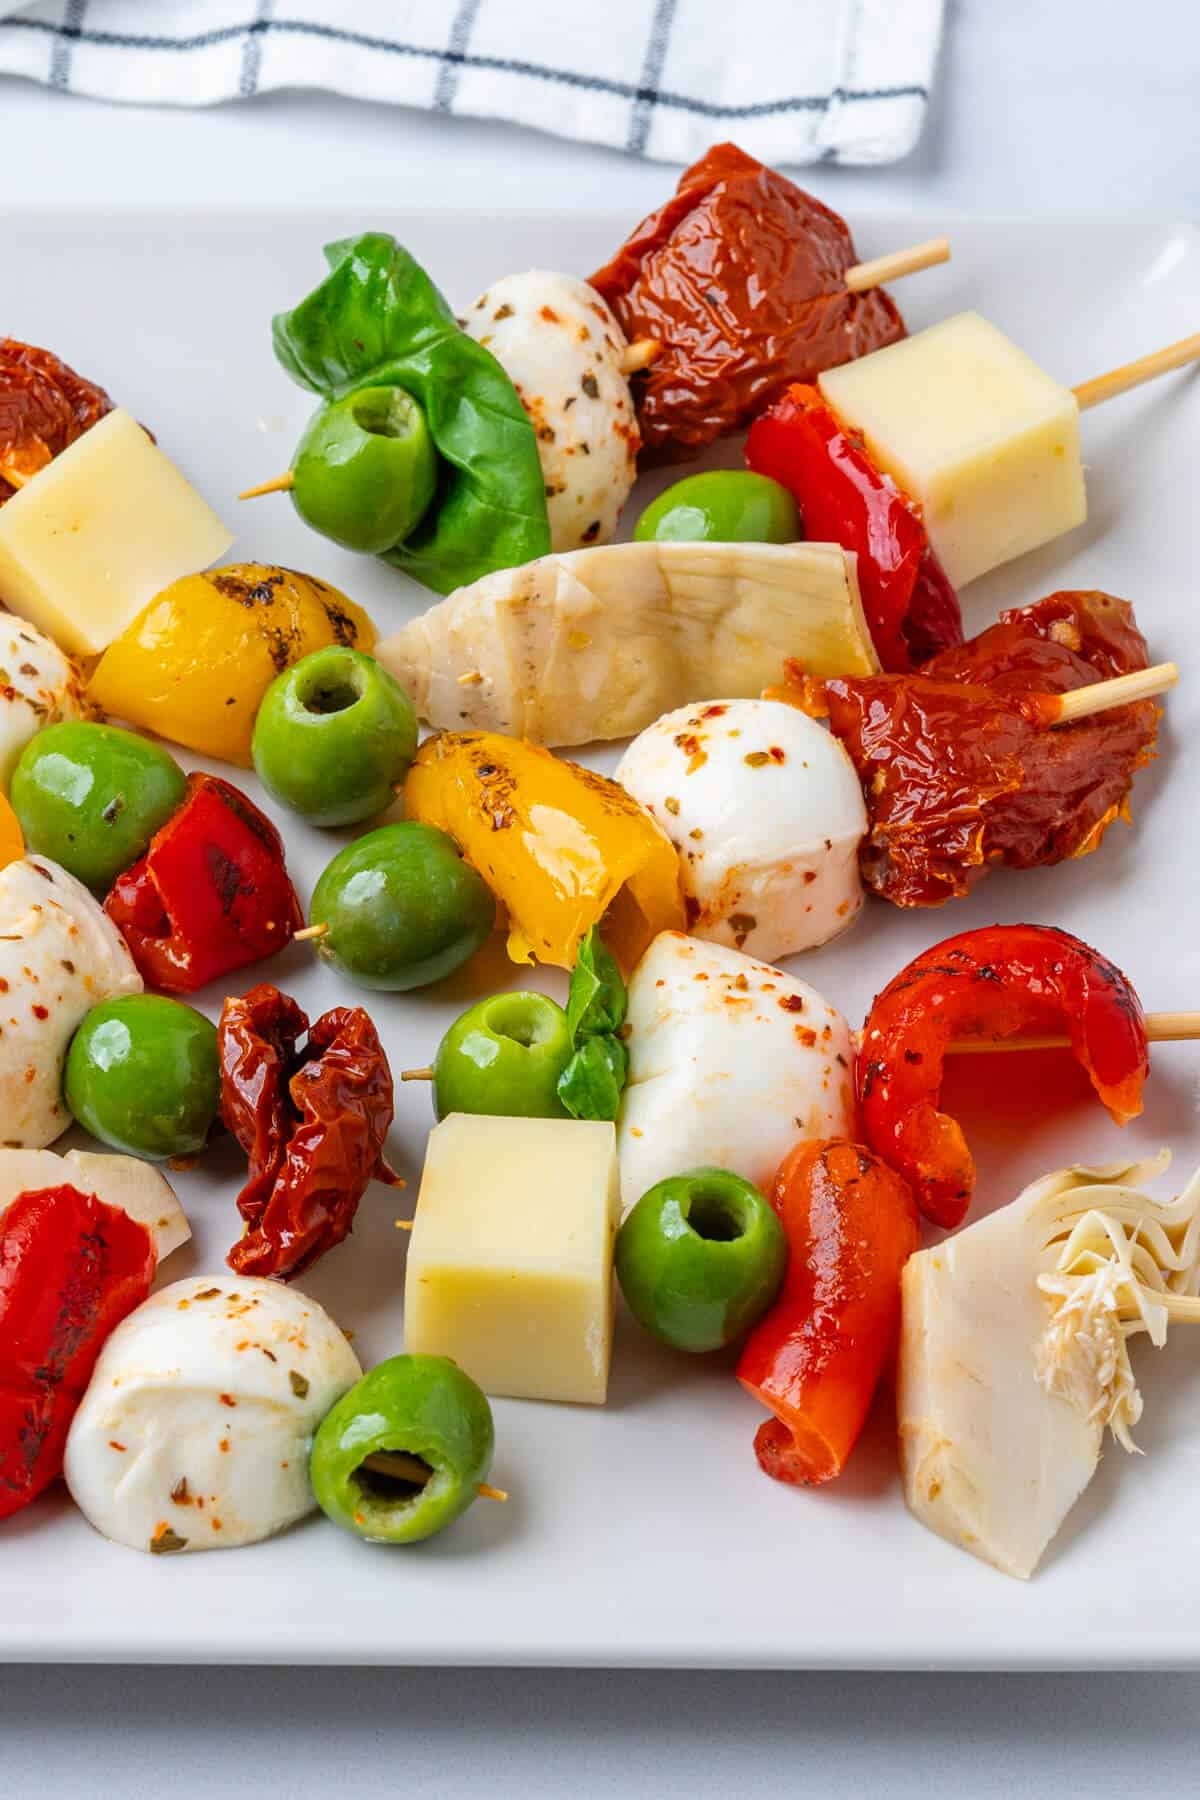 Antipasto skewers with a mix of cheese, red peppers, olive, sun dried tomatoes and artichokes